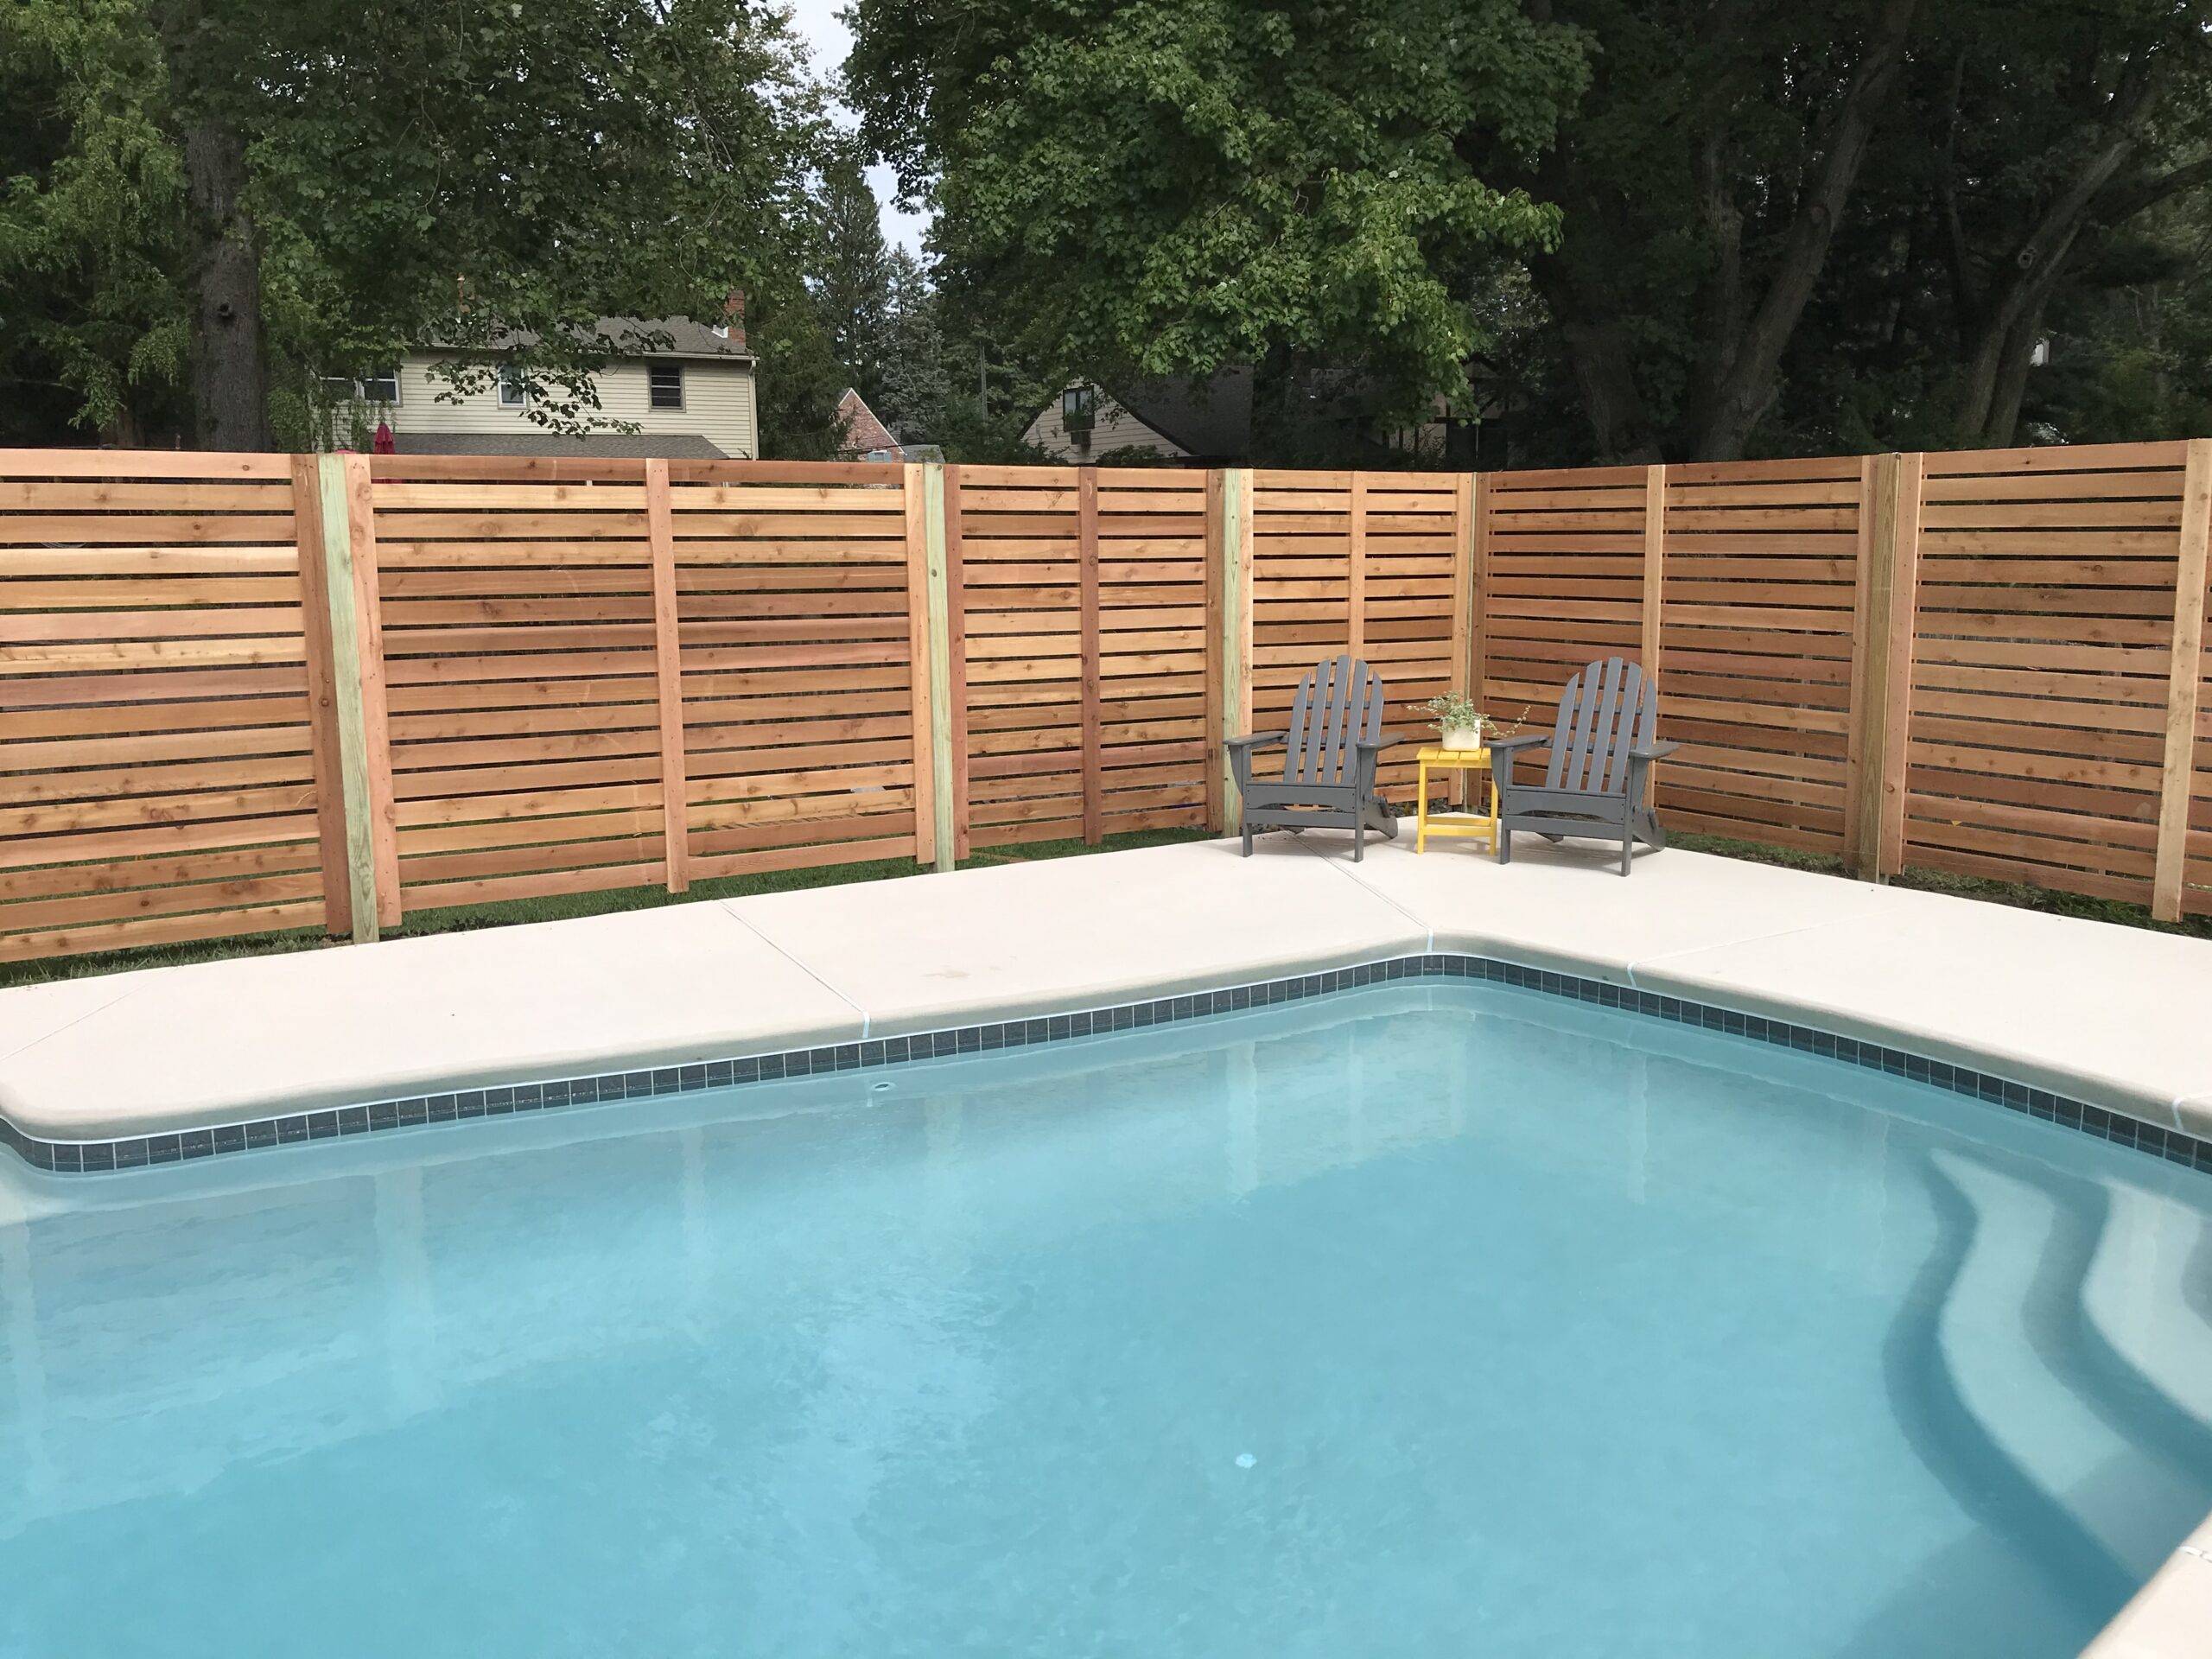 6 ft tall horizontal wooden fence around pool